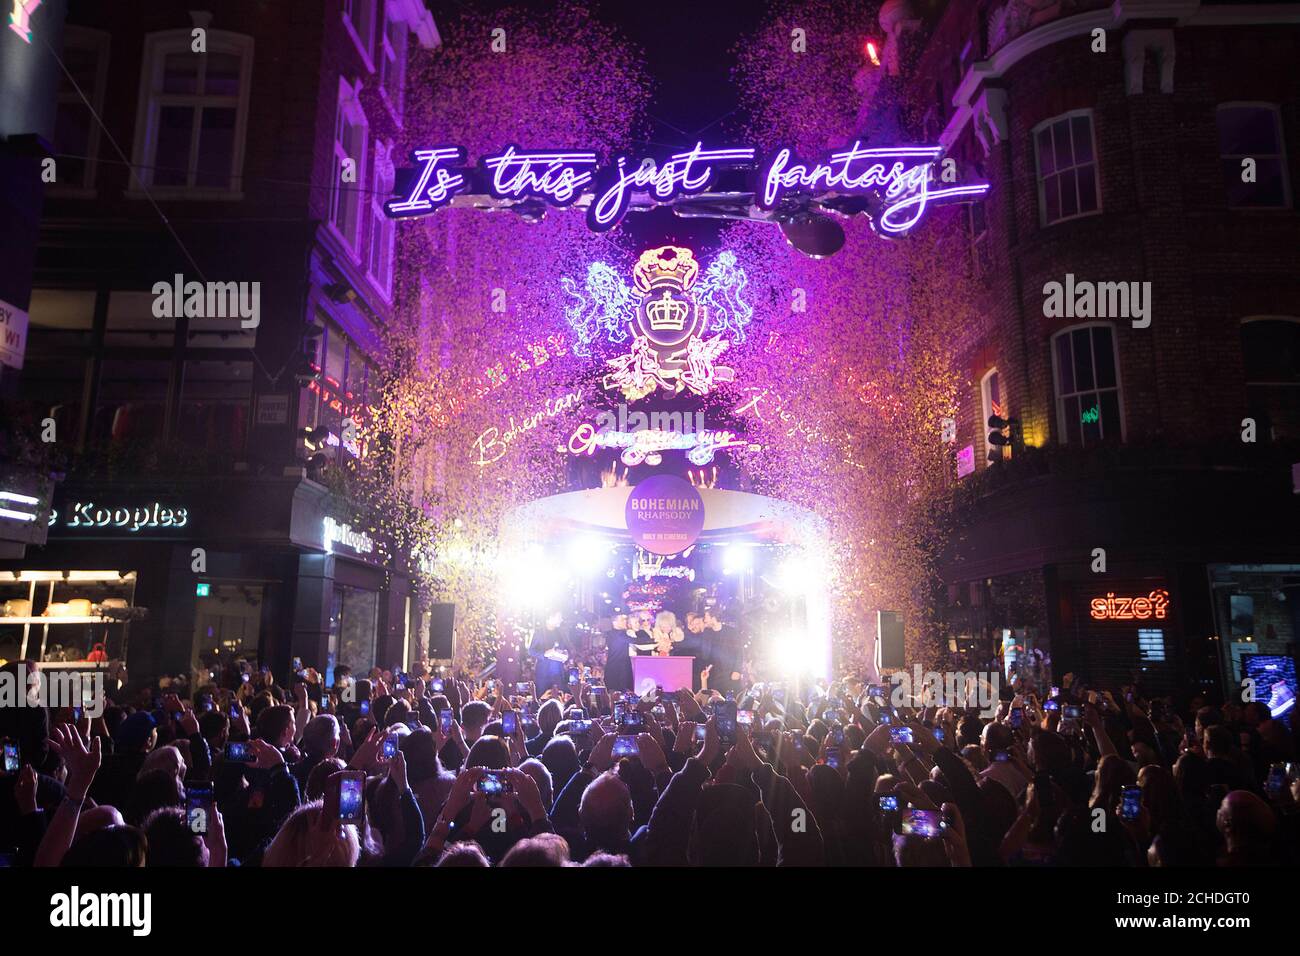 Brian May and Roger Taylor help to launch a light installation celebrating the Queen song Bohemian Rhapsody at Carnaby Street in London. The lights featuring Freddie Mercury's lyrics will illuminate the street until January, in honour of the upcoming movie. Stock Photo